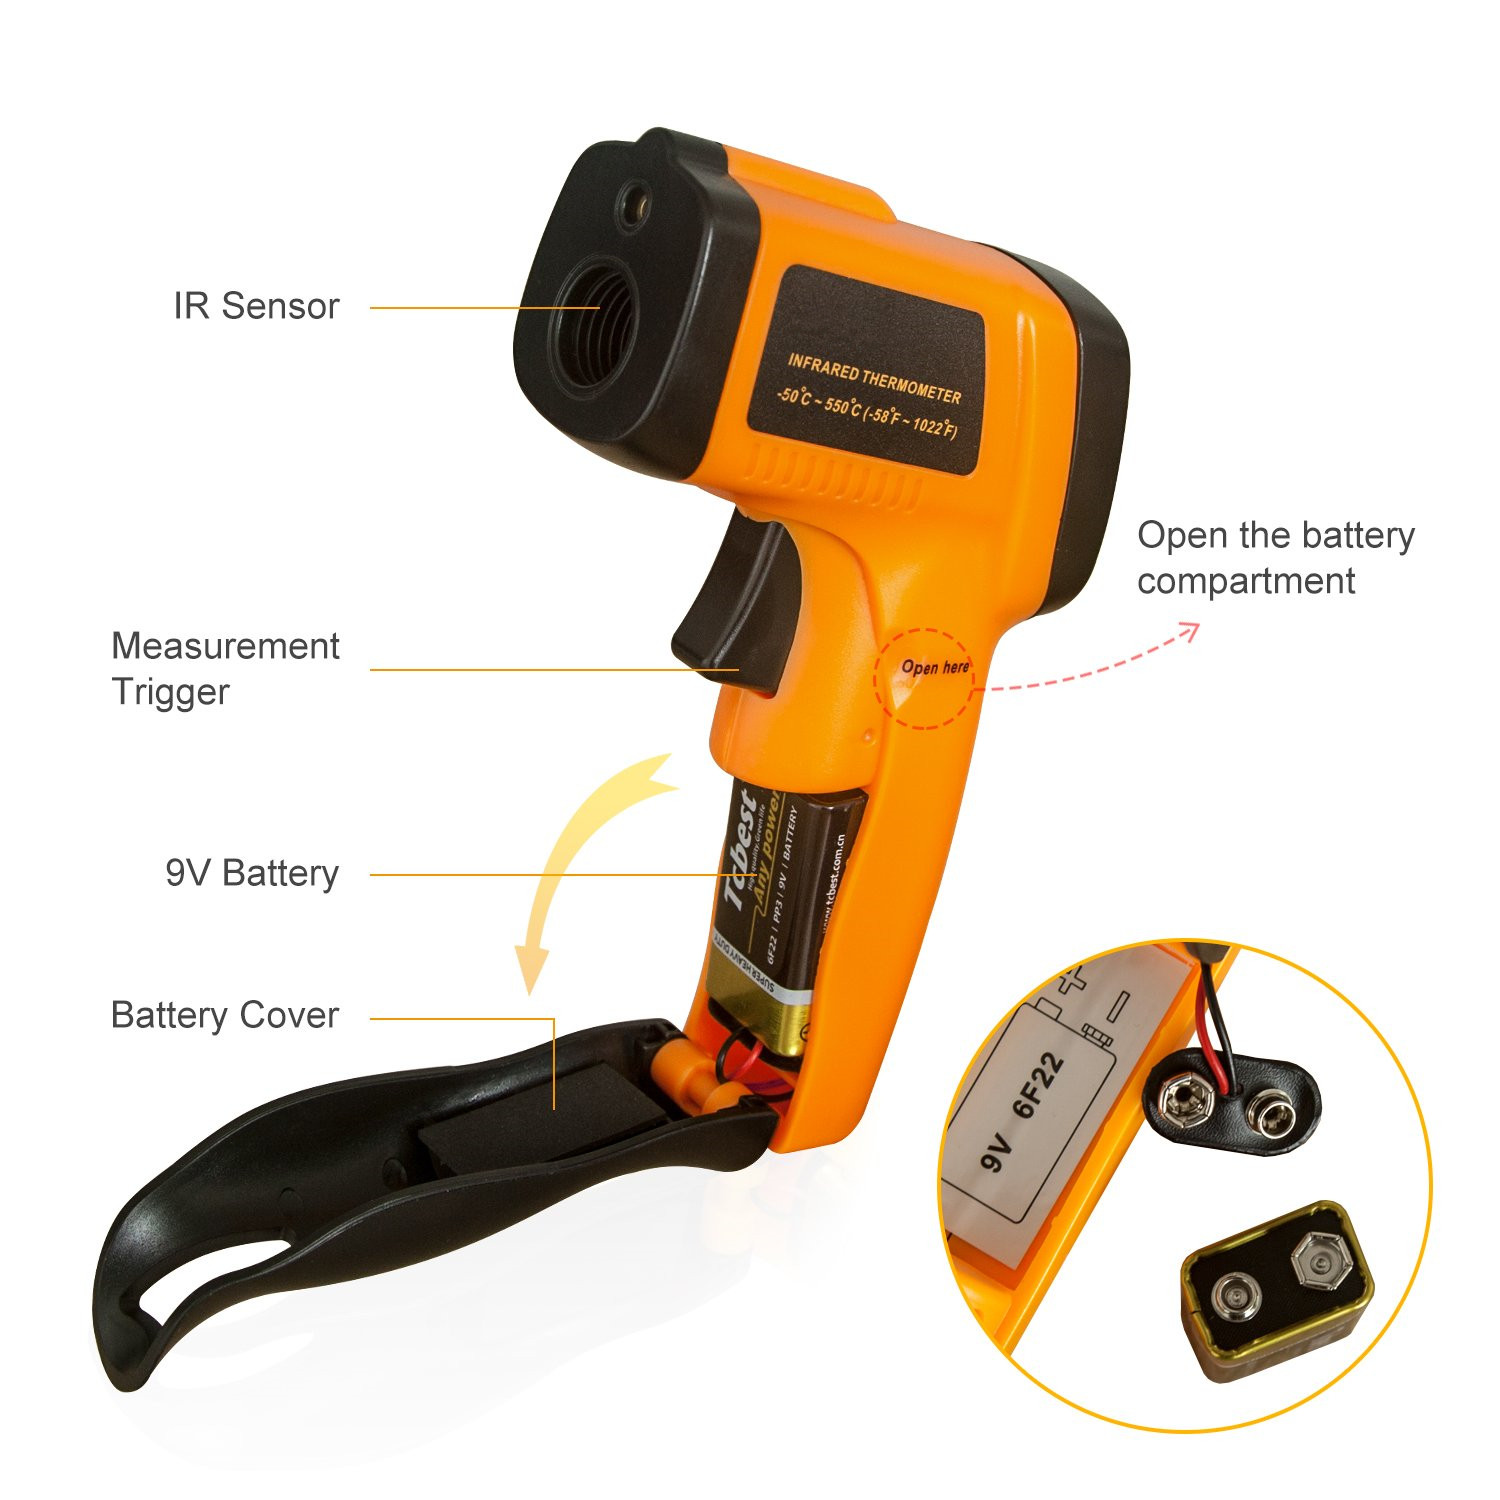 INFRARED THERMOMETER DIGITAL